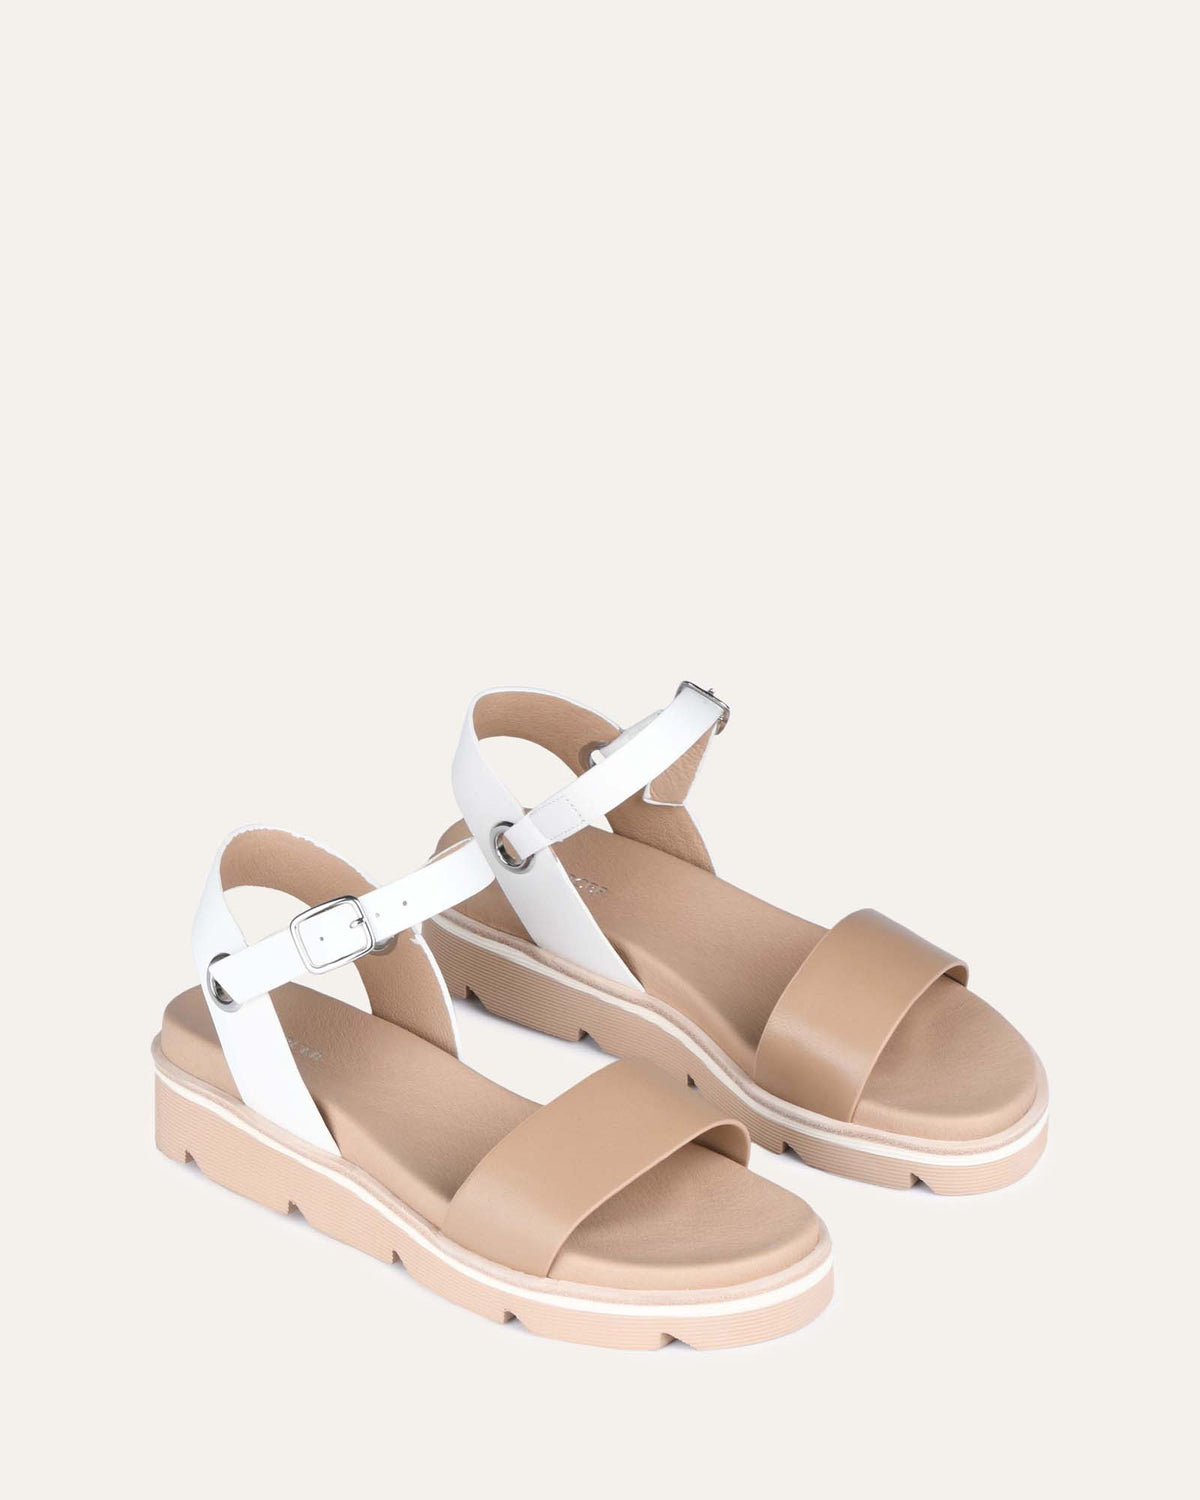 ILLUSION FLAT WEDGE SANDALS WHITE TAN LEATHER